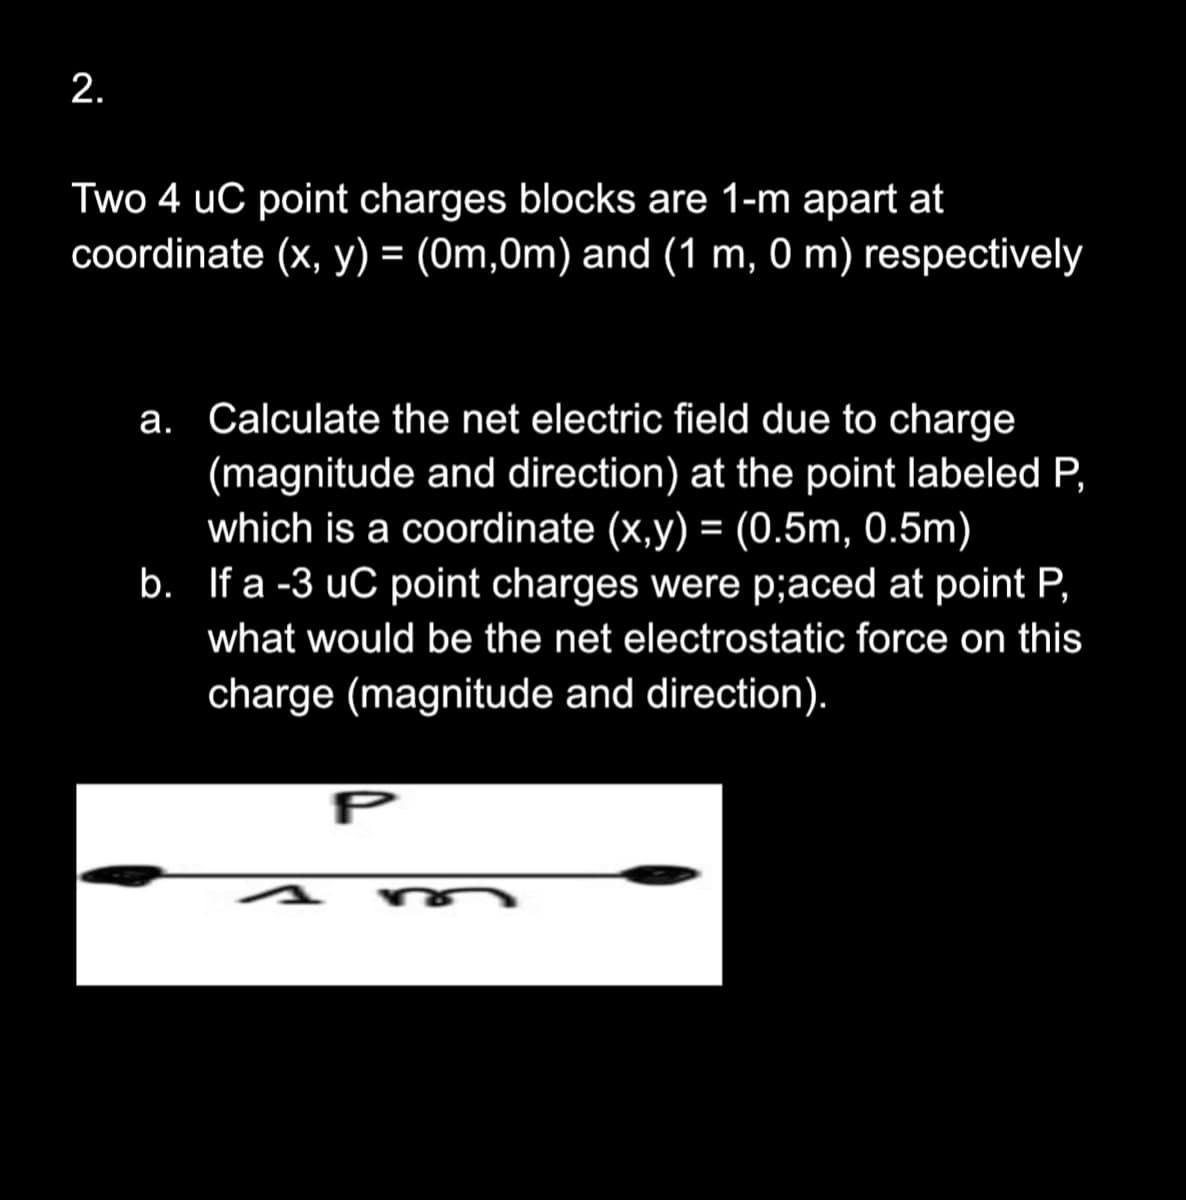 2.
Two 4 uC point charges blocks are 1-m apart at
coordinate (x, y) = (0m,0m) and (1 m, 0 m) respectively
a. Calculate the net electric field due to charge
(magnitude and direction) at the point labeled P,
which is a coordinate (x,y) = (0.5m, 0.5m)
b. If a -3 uC point charges were p;aced at point P,
what would be the net electrostatic force on this
charge (magnitude and direction).
